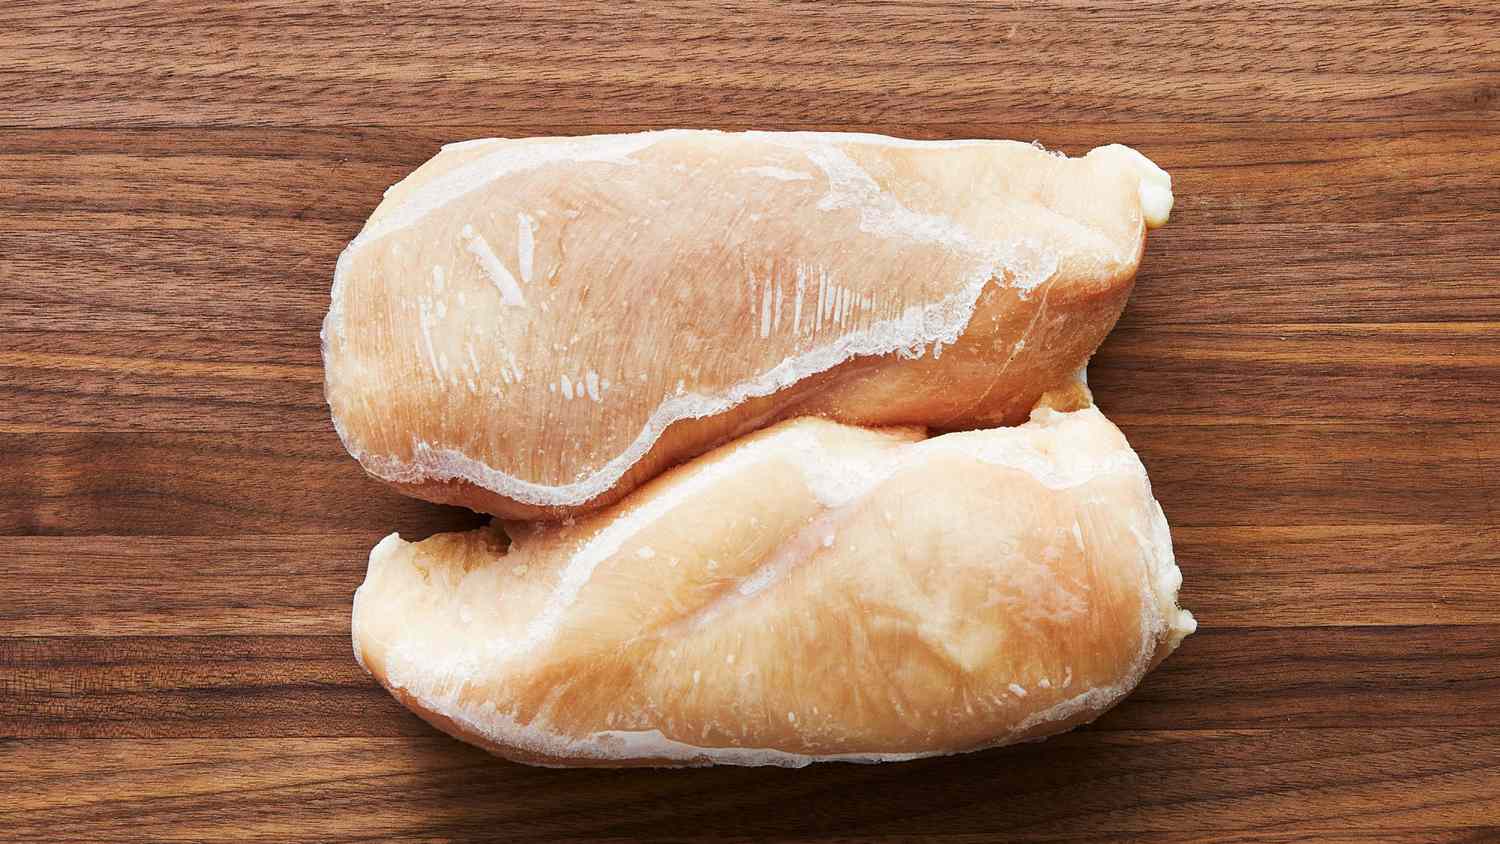 How To Store Raw Chicken In Freezer